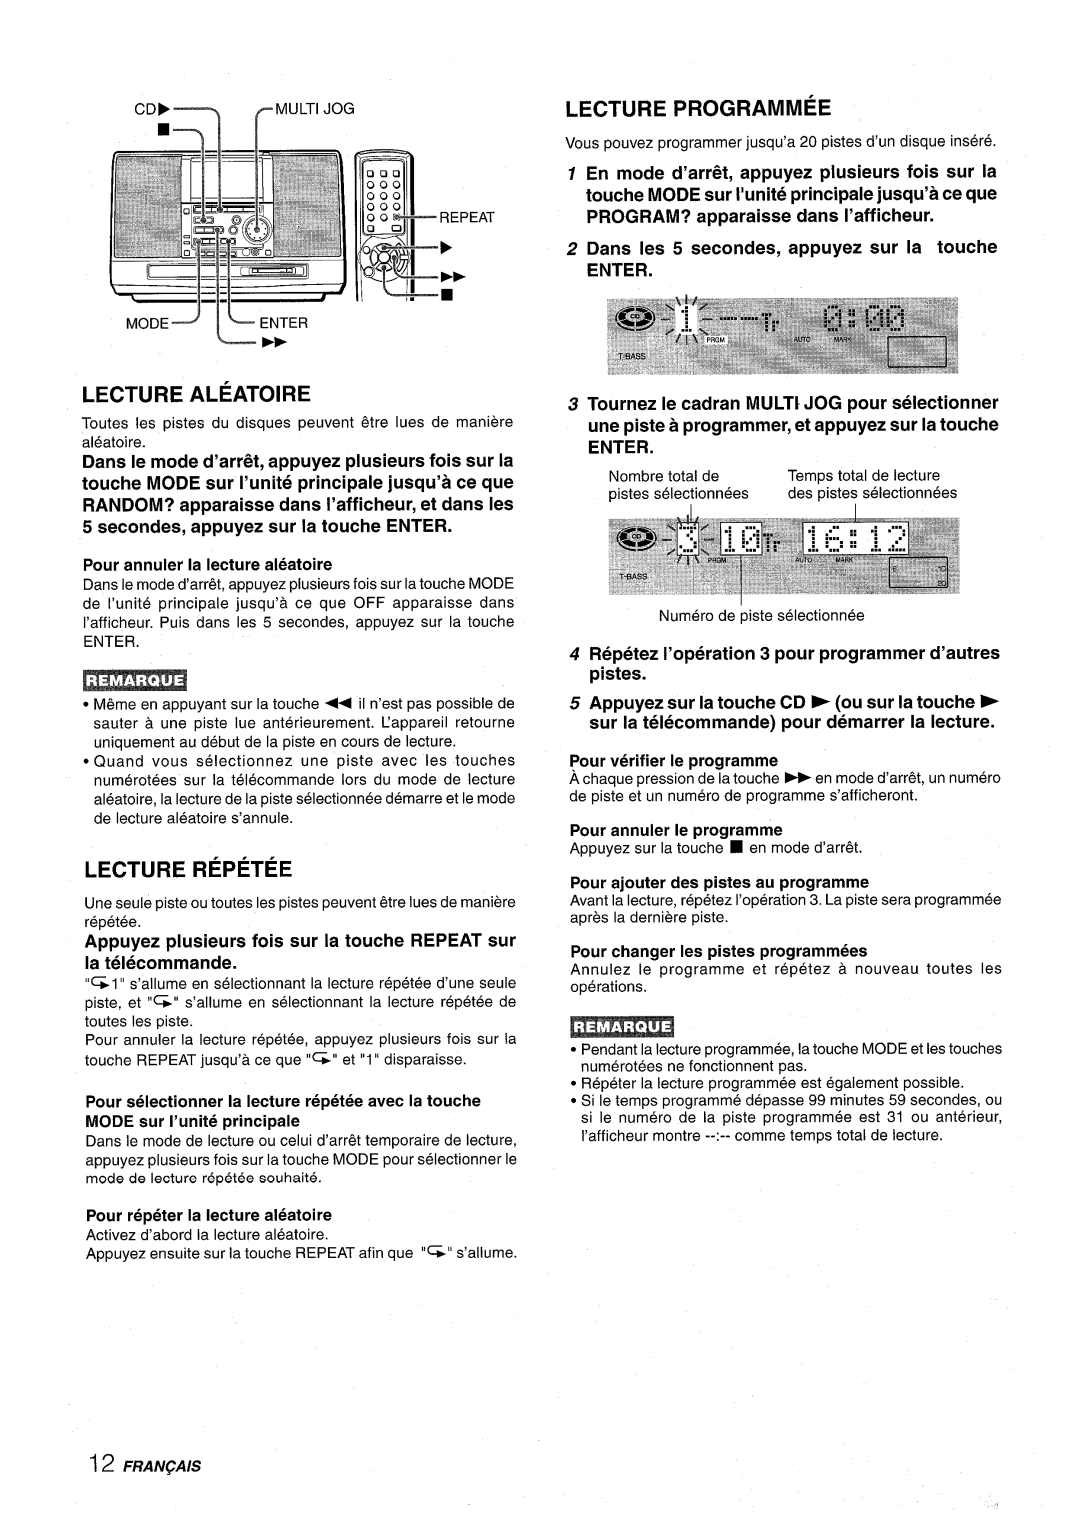 Aiwa CSD-MD50 manual Cd“”’T””’, ’11~, Lecture Programmed, Lecture Aleatoire, Lecture Repetee 